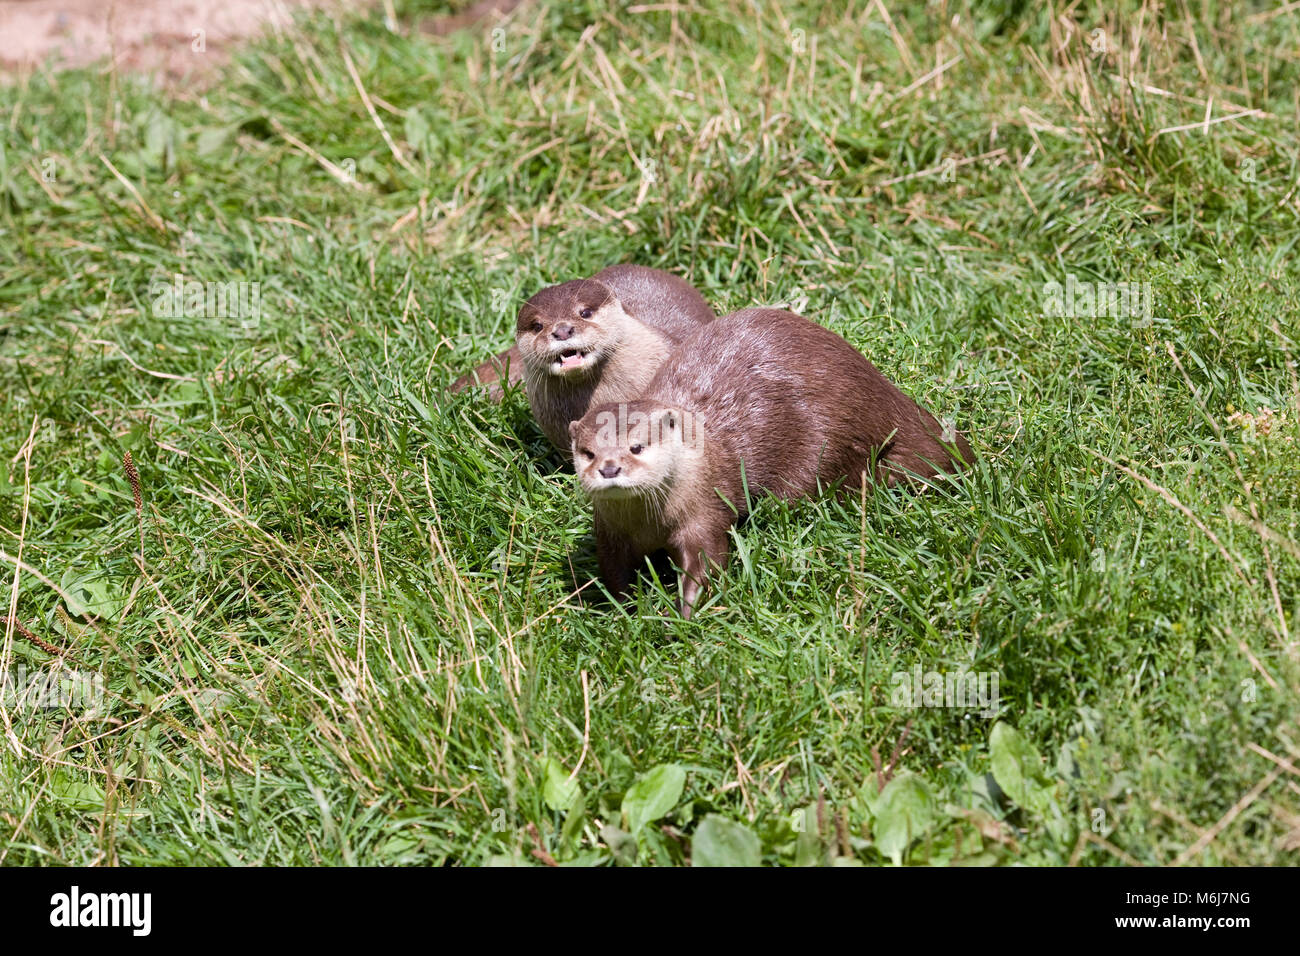 Lutra lutra. European Otters in captivity. Stock Photo